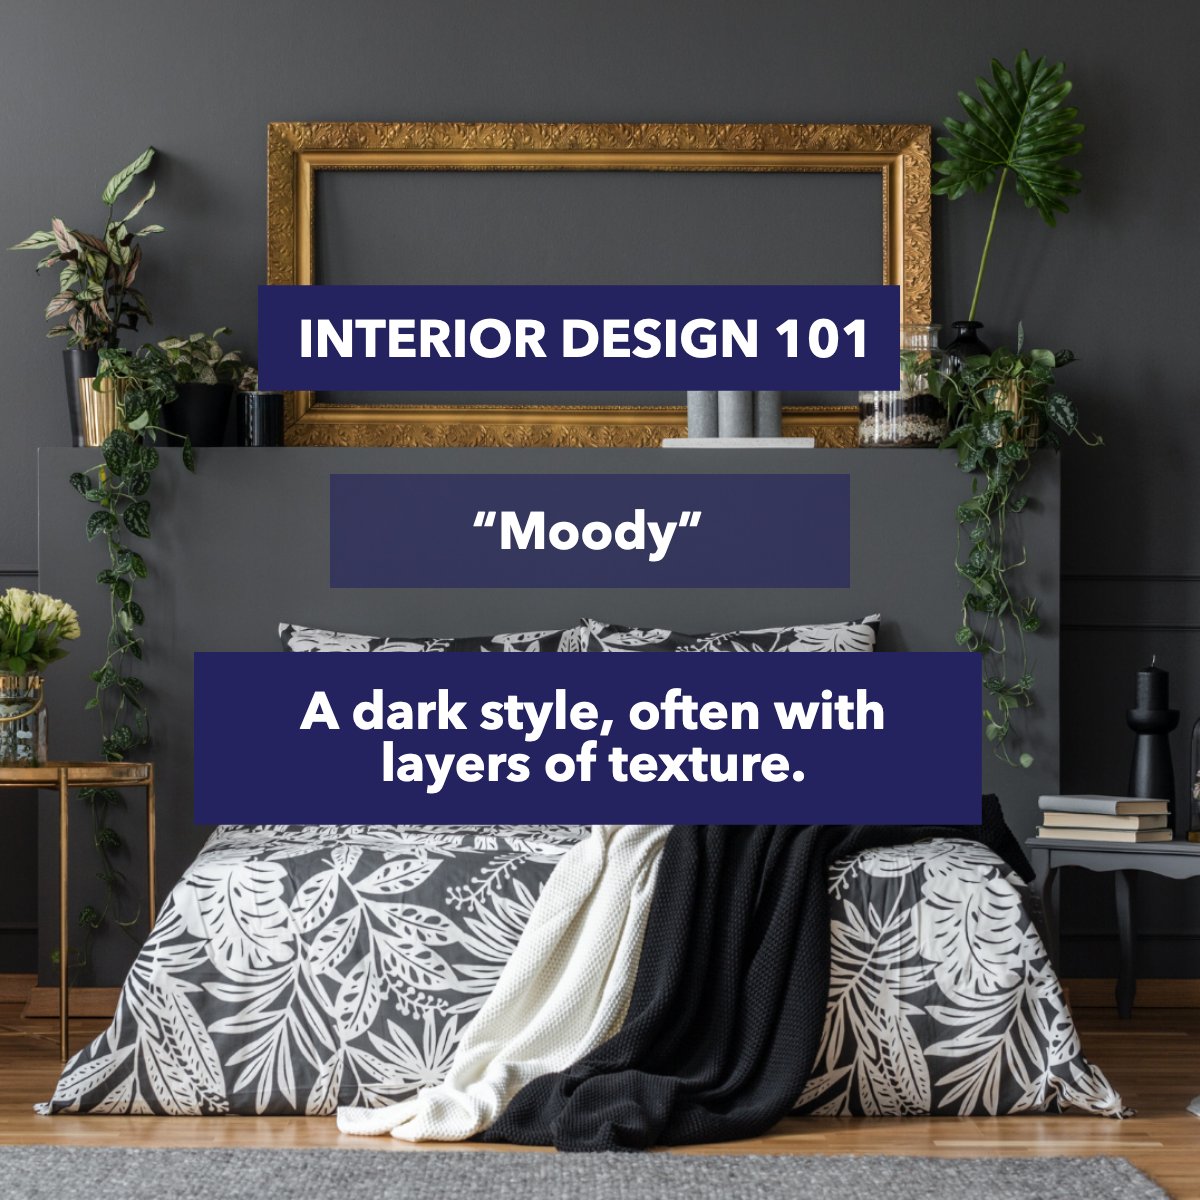 Moody is not only a mood is a style in interior design. 

Are you feeling moody? 

#interiorsdesign #interiortrends #interiordesigning #interiordesigntrends #interiorsaddict #interiordesigntips #interiordesigngoals 
 #lasvegasrealtor #lasvegasrealestate #sparrowsells